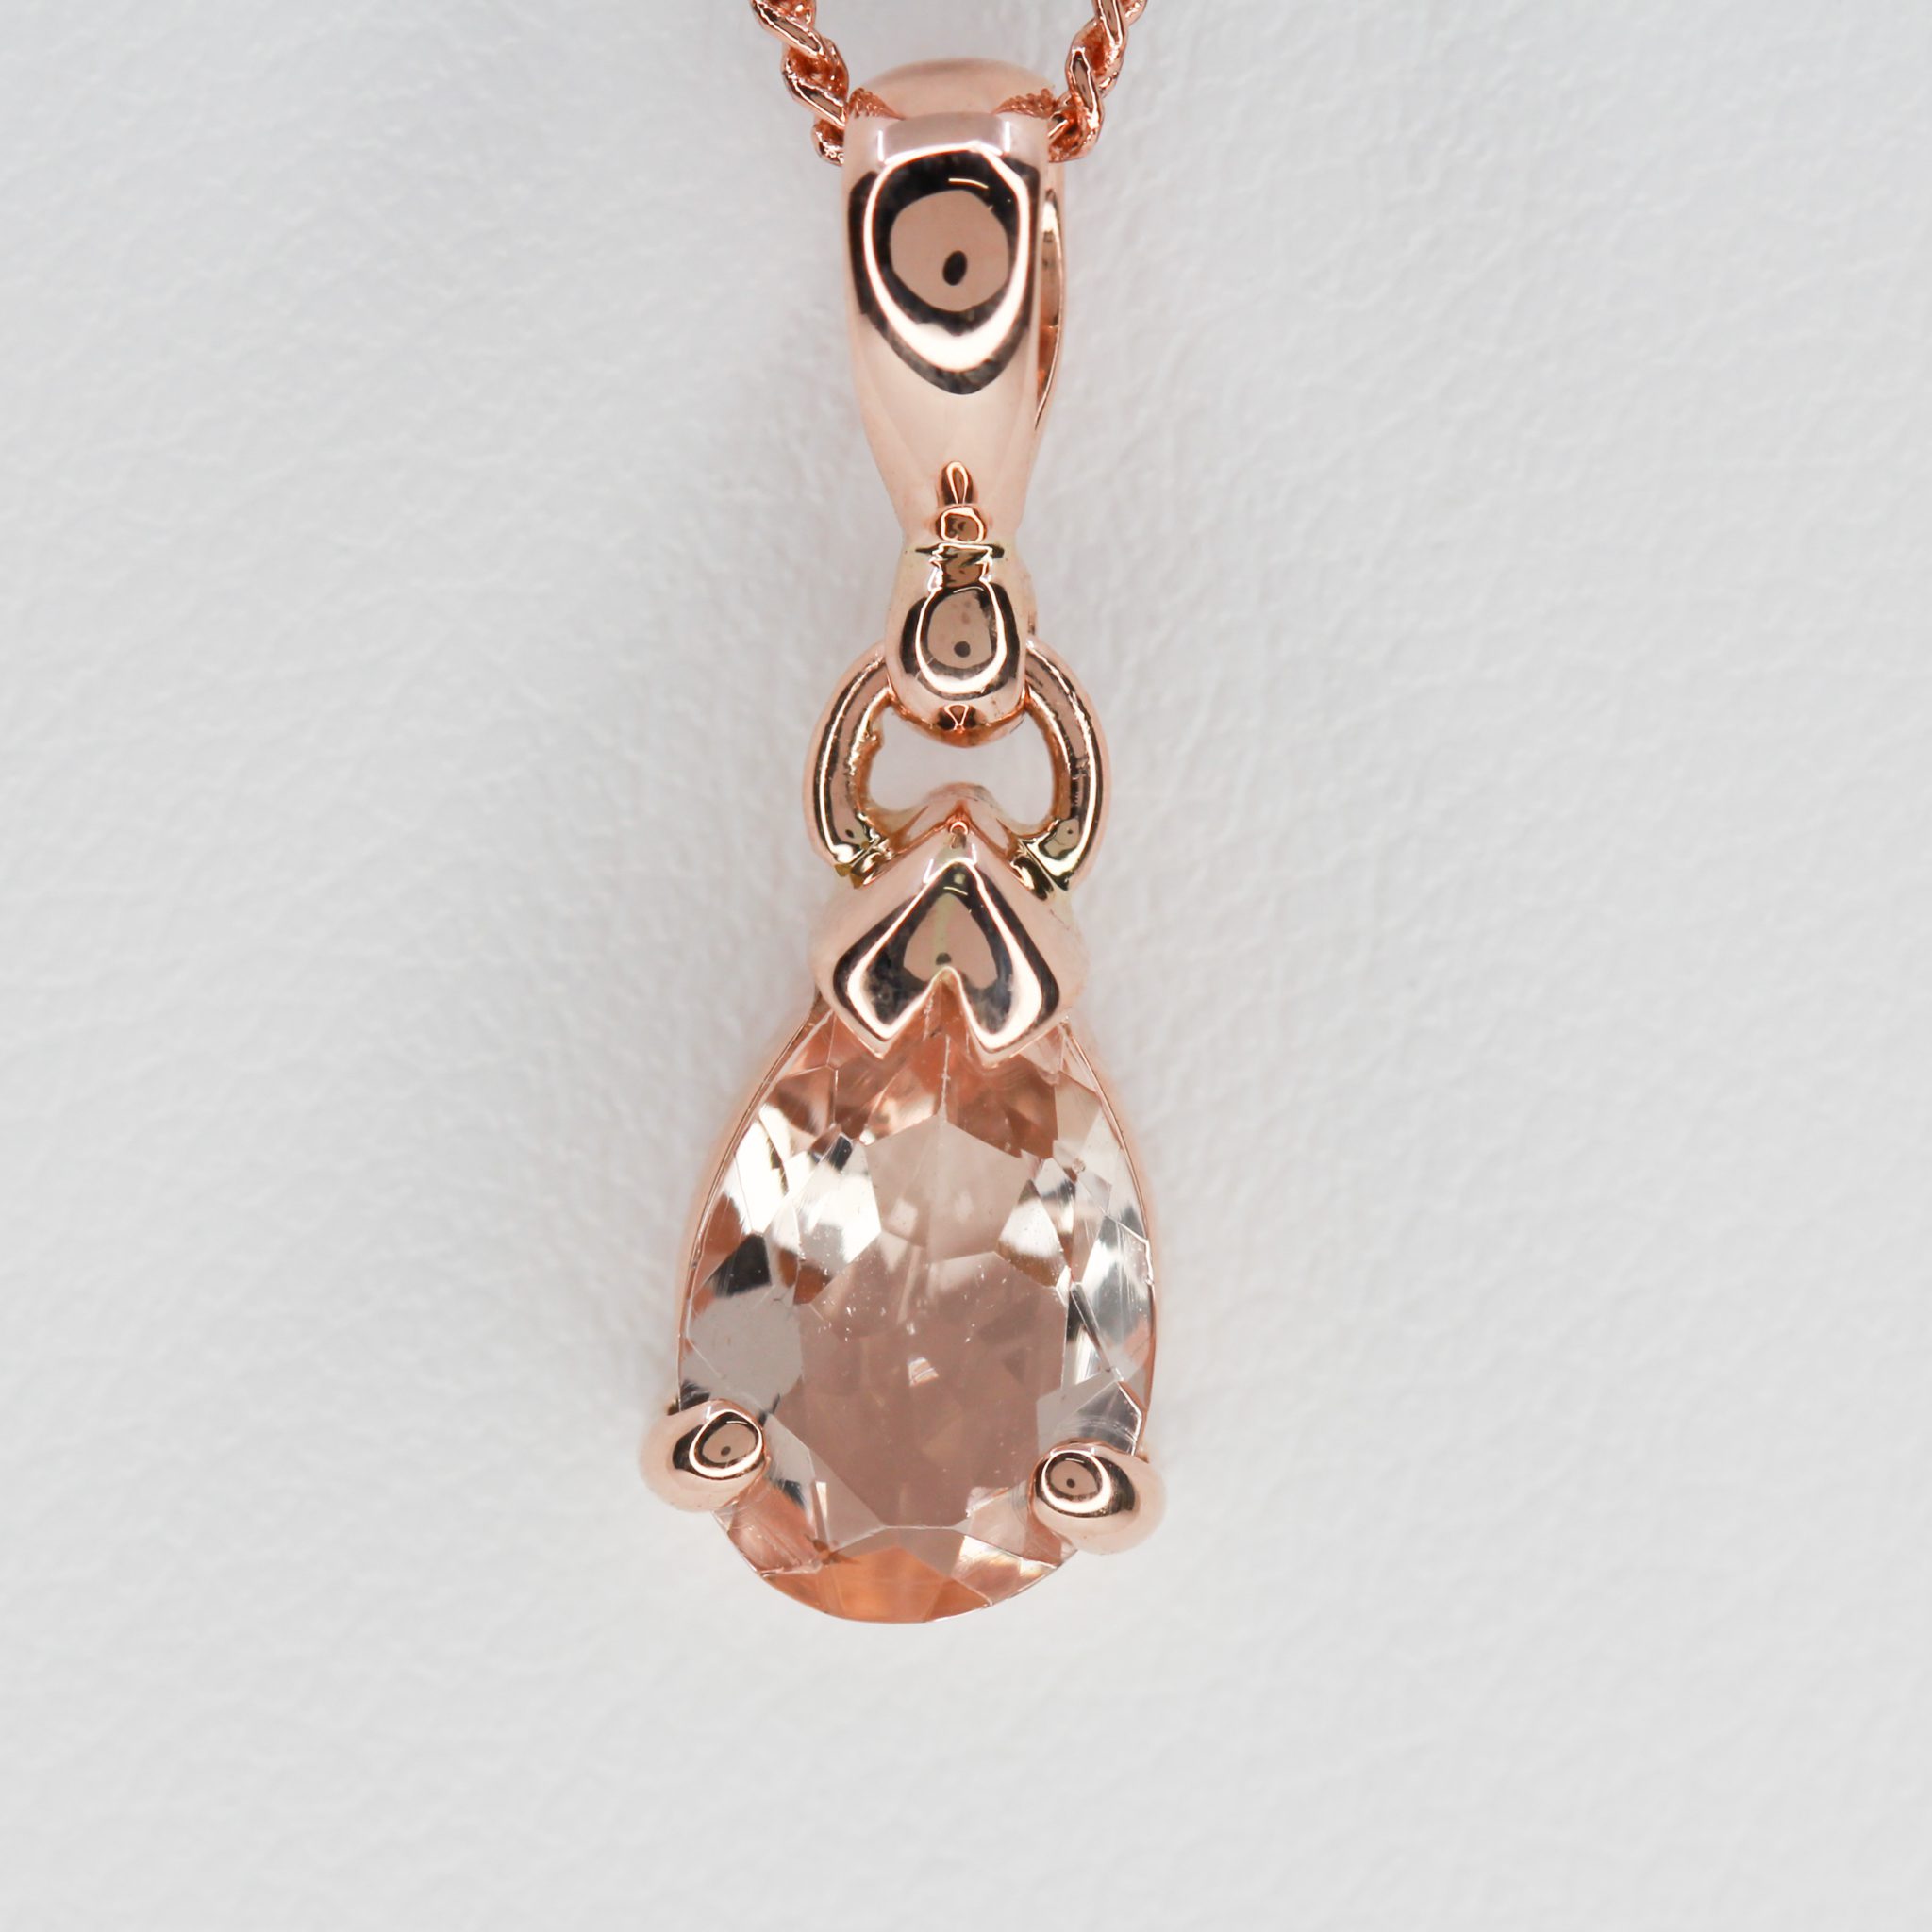 Morganite and Diamond Halo Pendant in 14k Rose Gold (0.27 ct. tw.) (14x12mm)